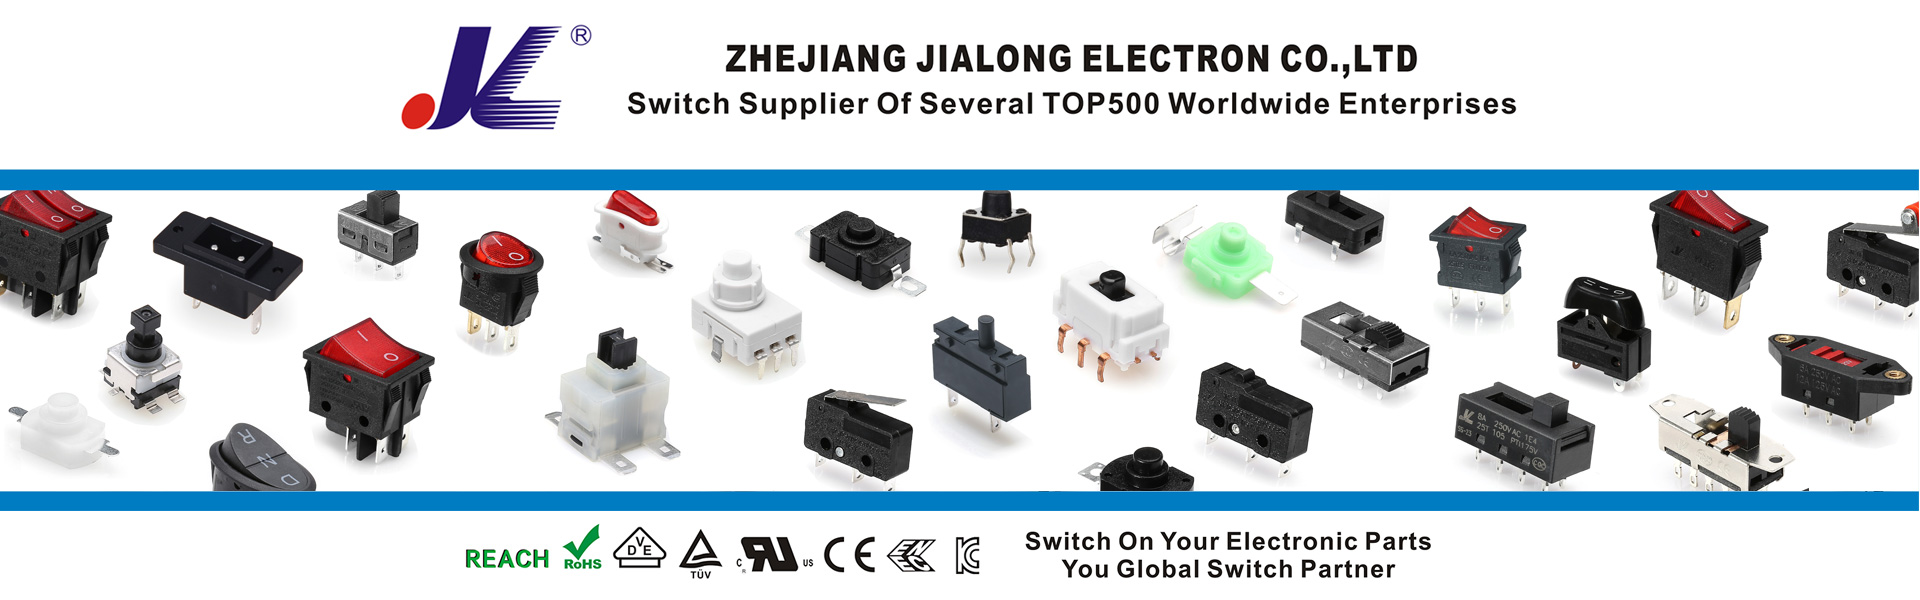 switch supplier of several Top500 worldwide enterprises